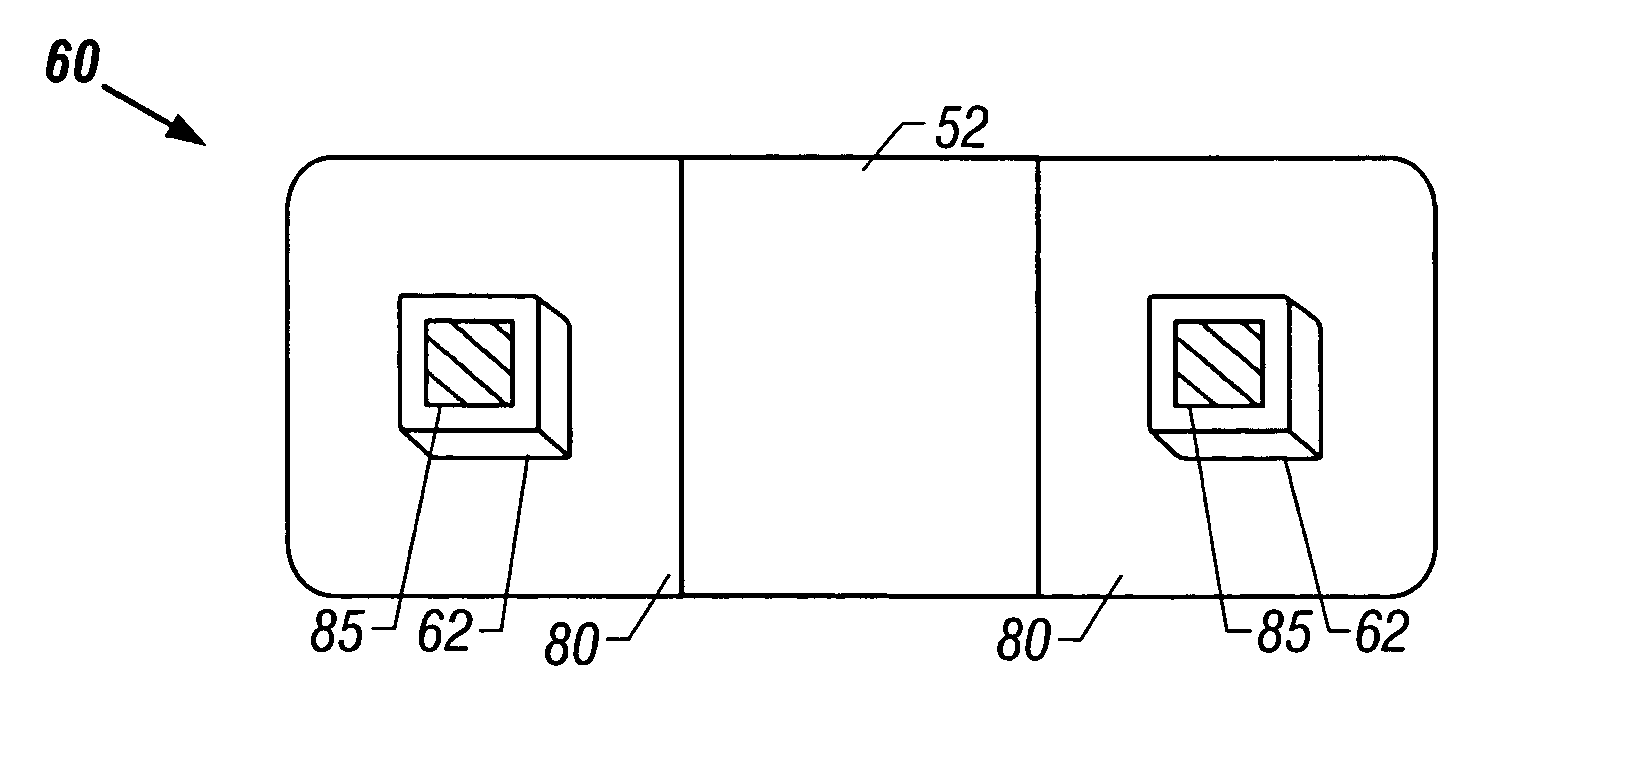 Method of making a housing for drug delivery